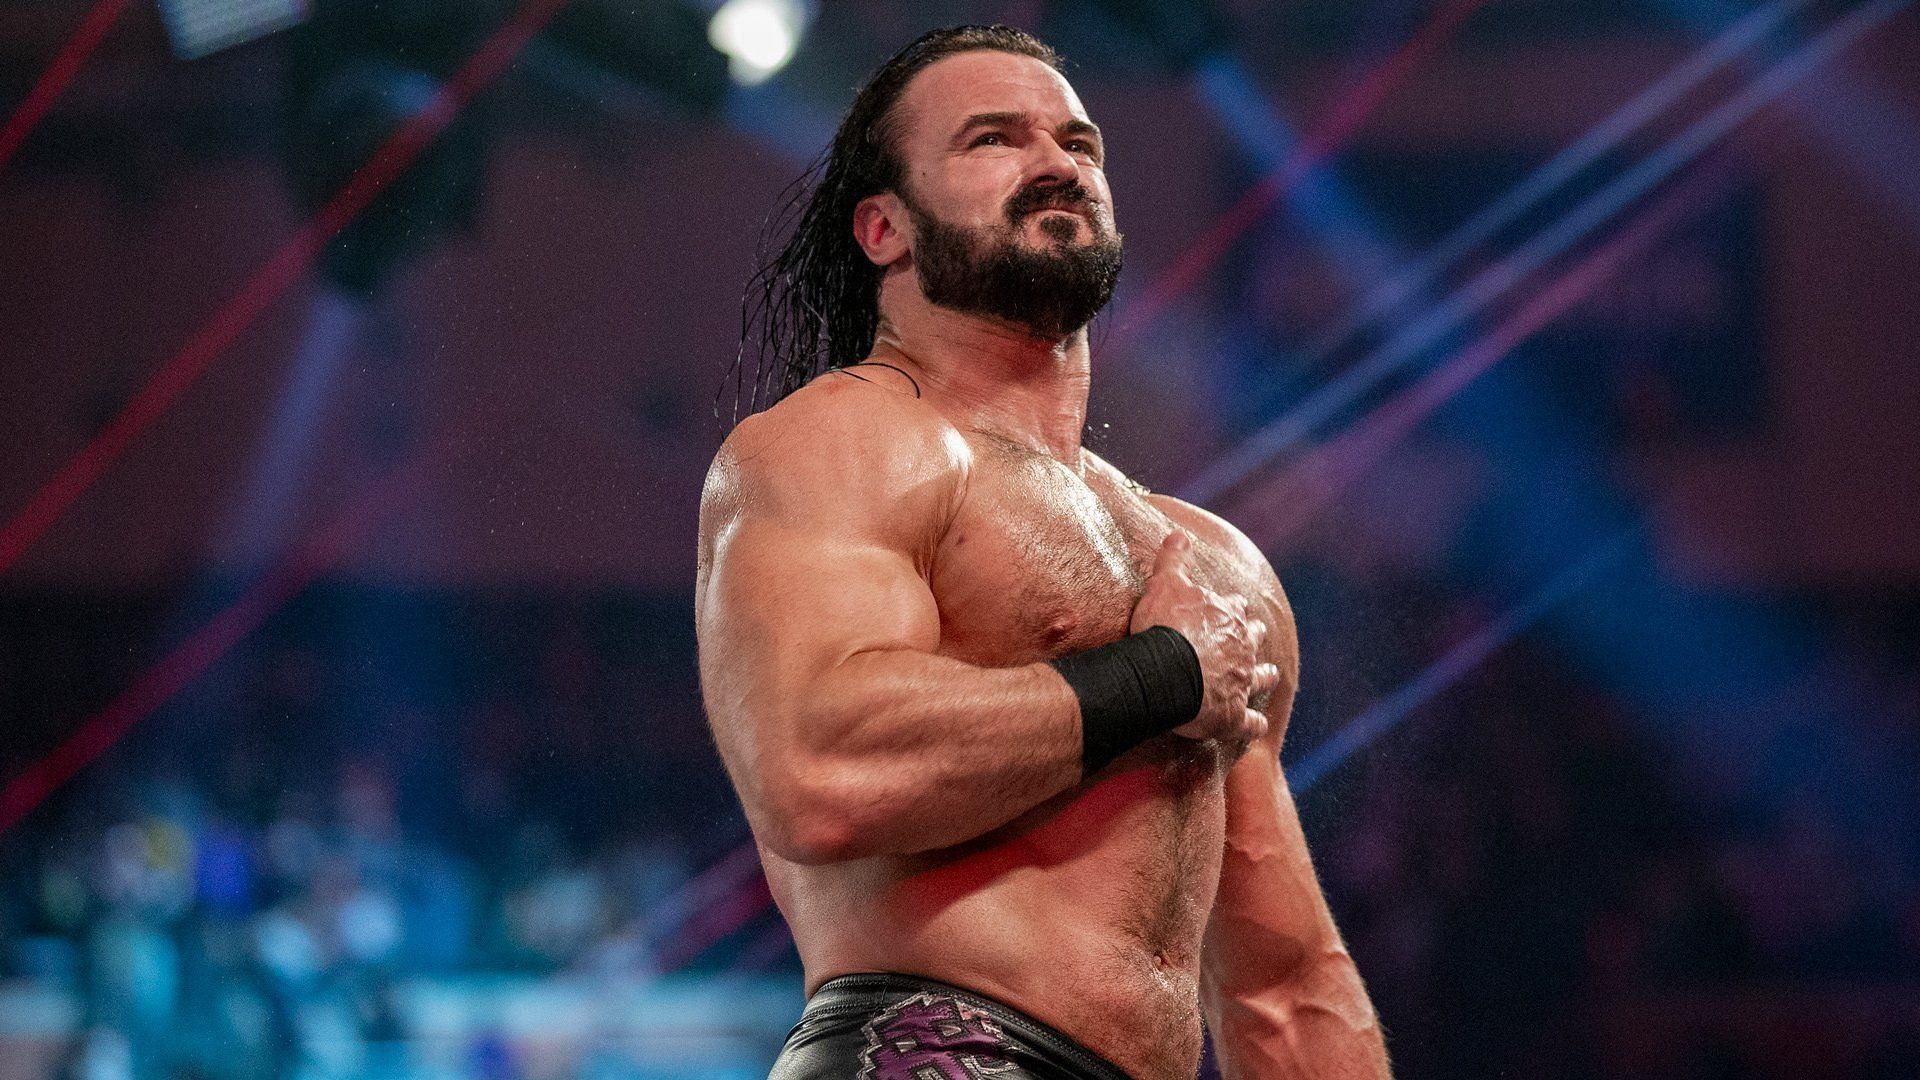 Drew McIntyre emerged victorious at Elimination Chamber